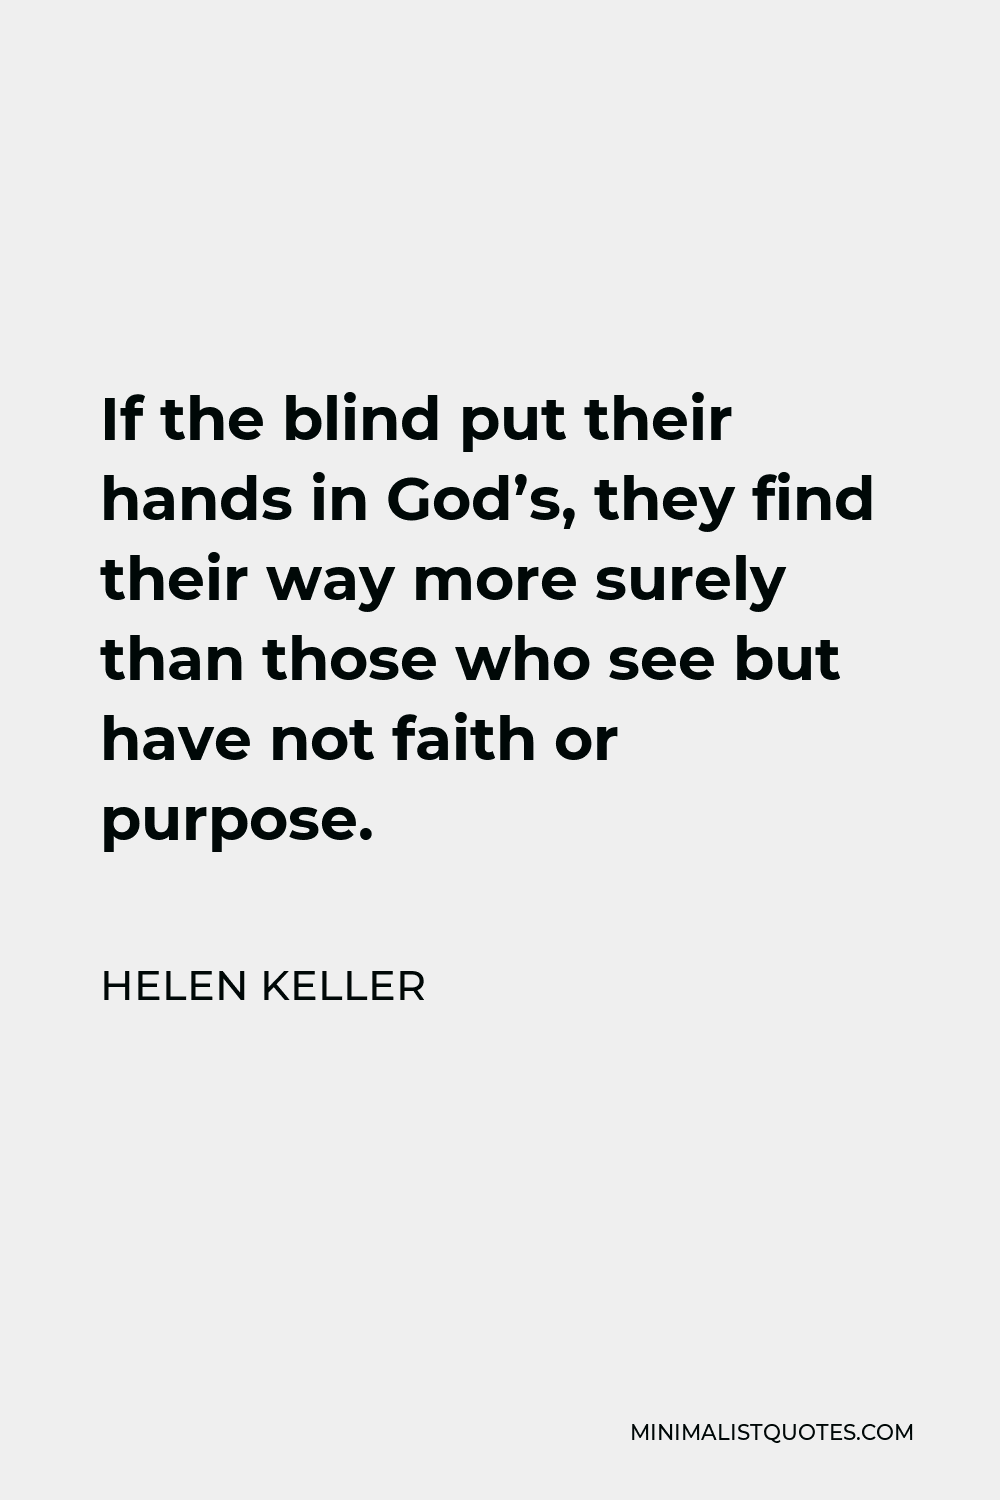 Helen Keller Quote - If the blind put their hands in God’s, they find their way more surely than those who see but have not faith or purpose.